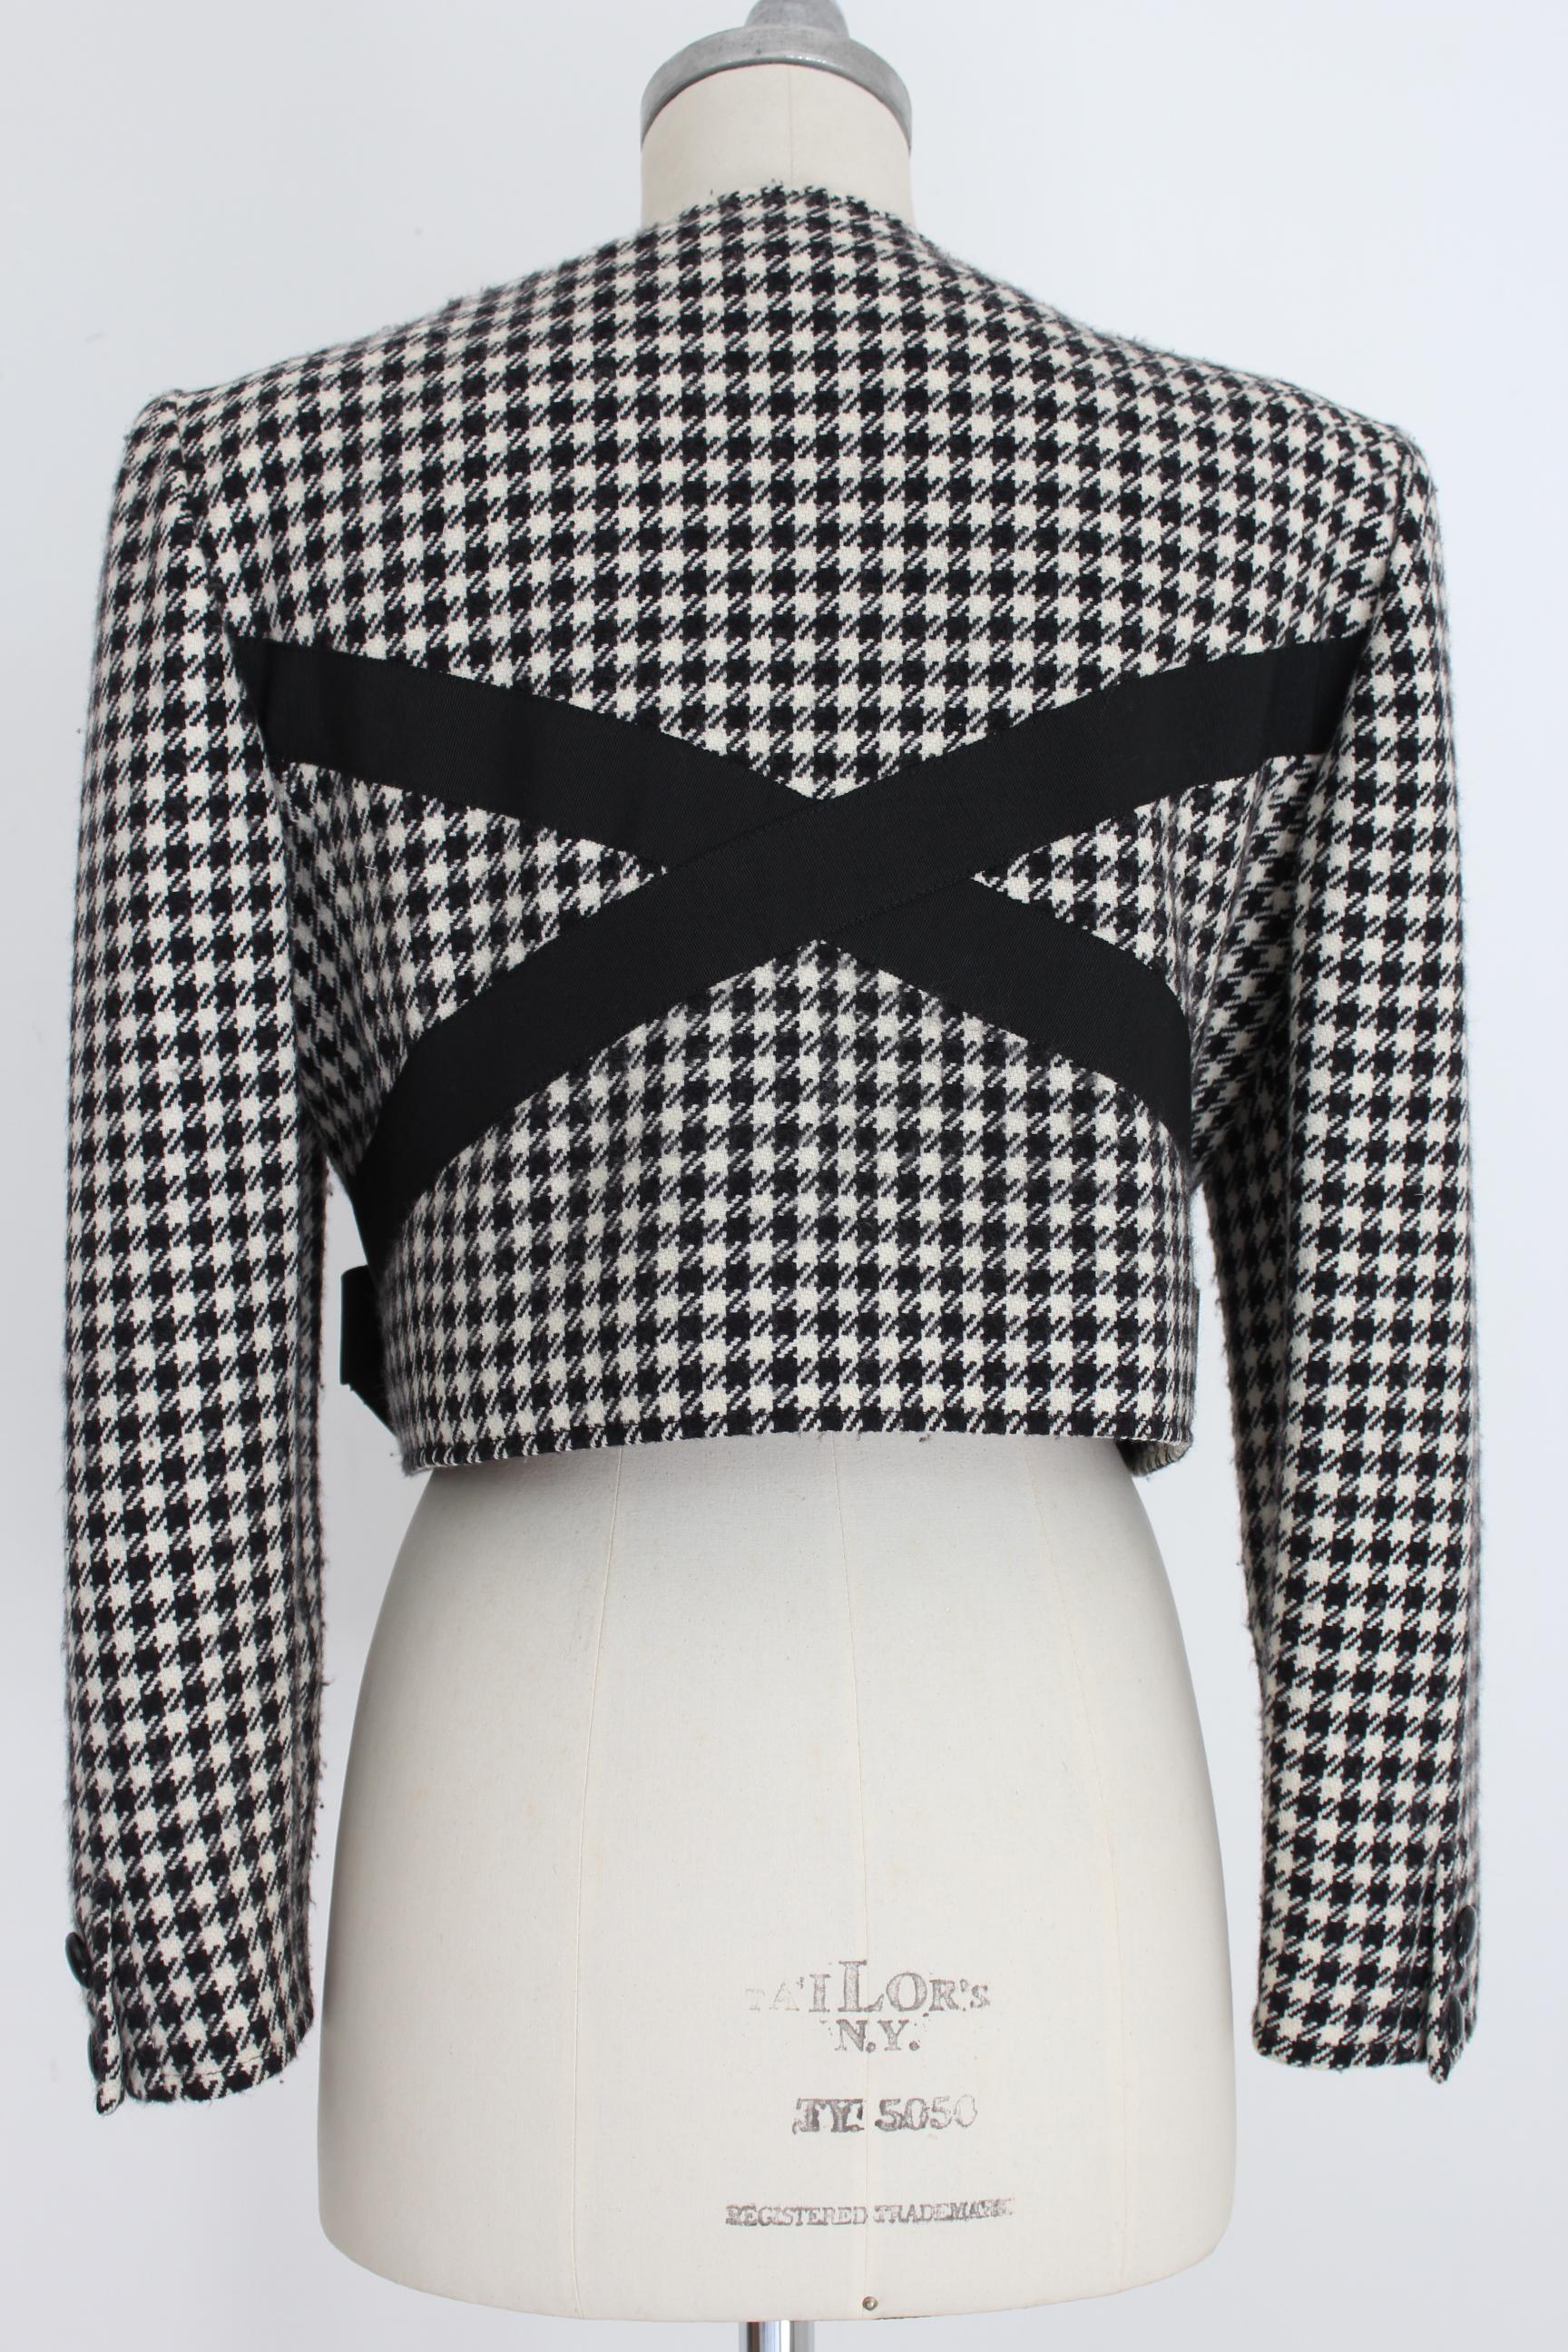 Valentino Boutique Black White Wool Houndstooth Evening Skirt Suit 1980s 1